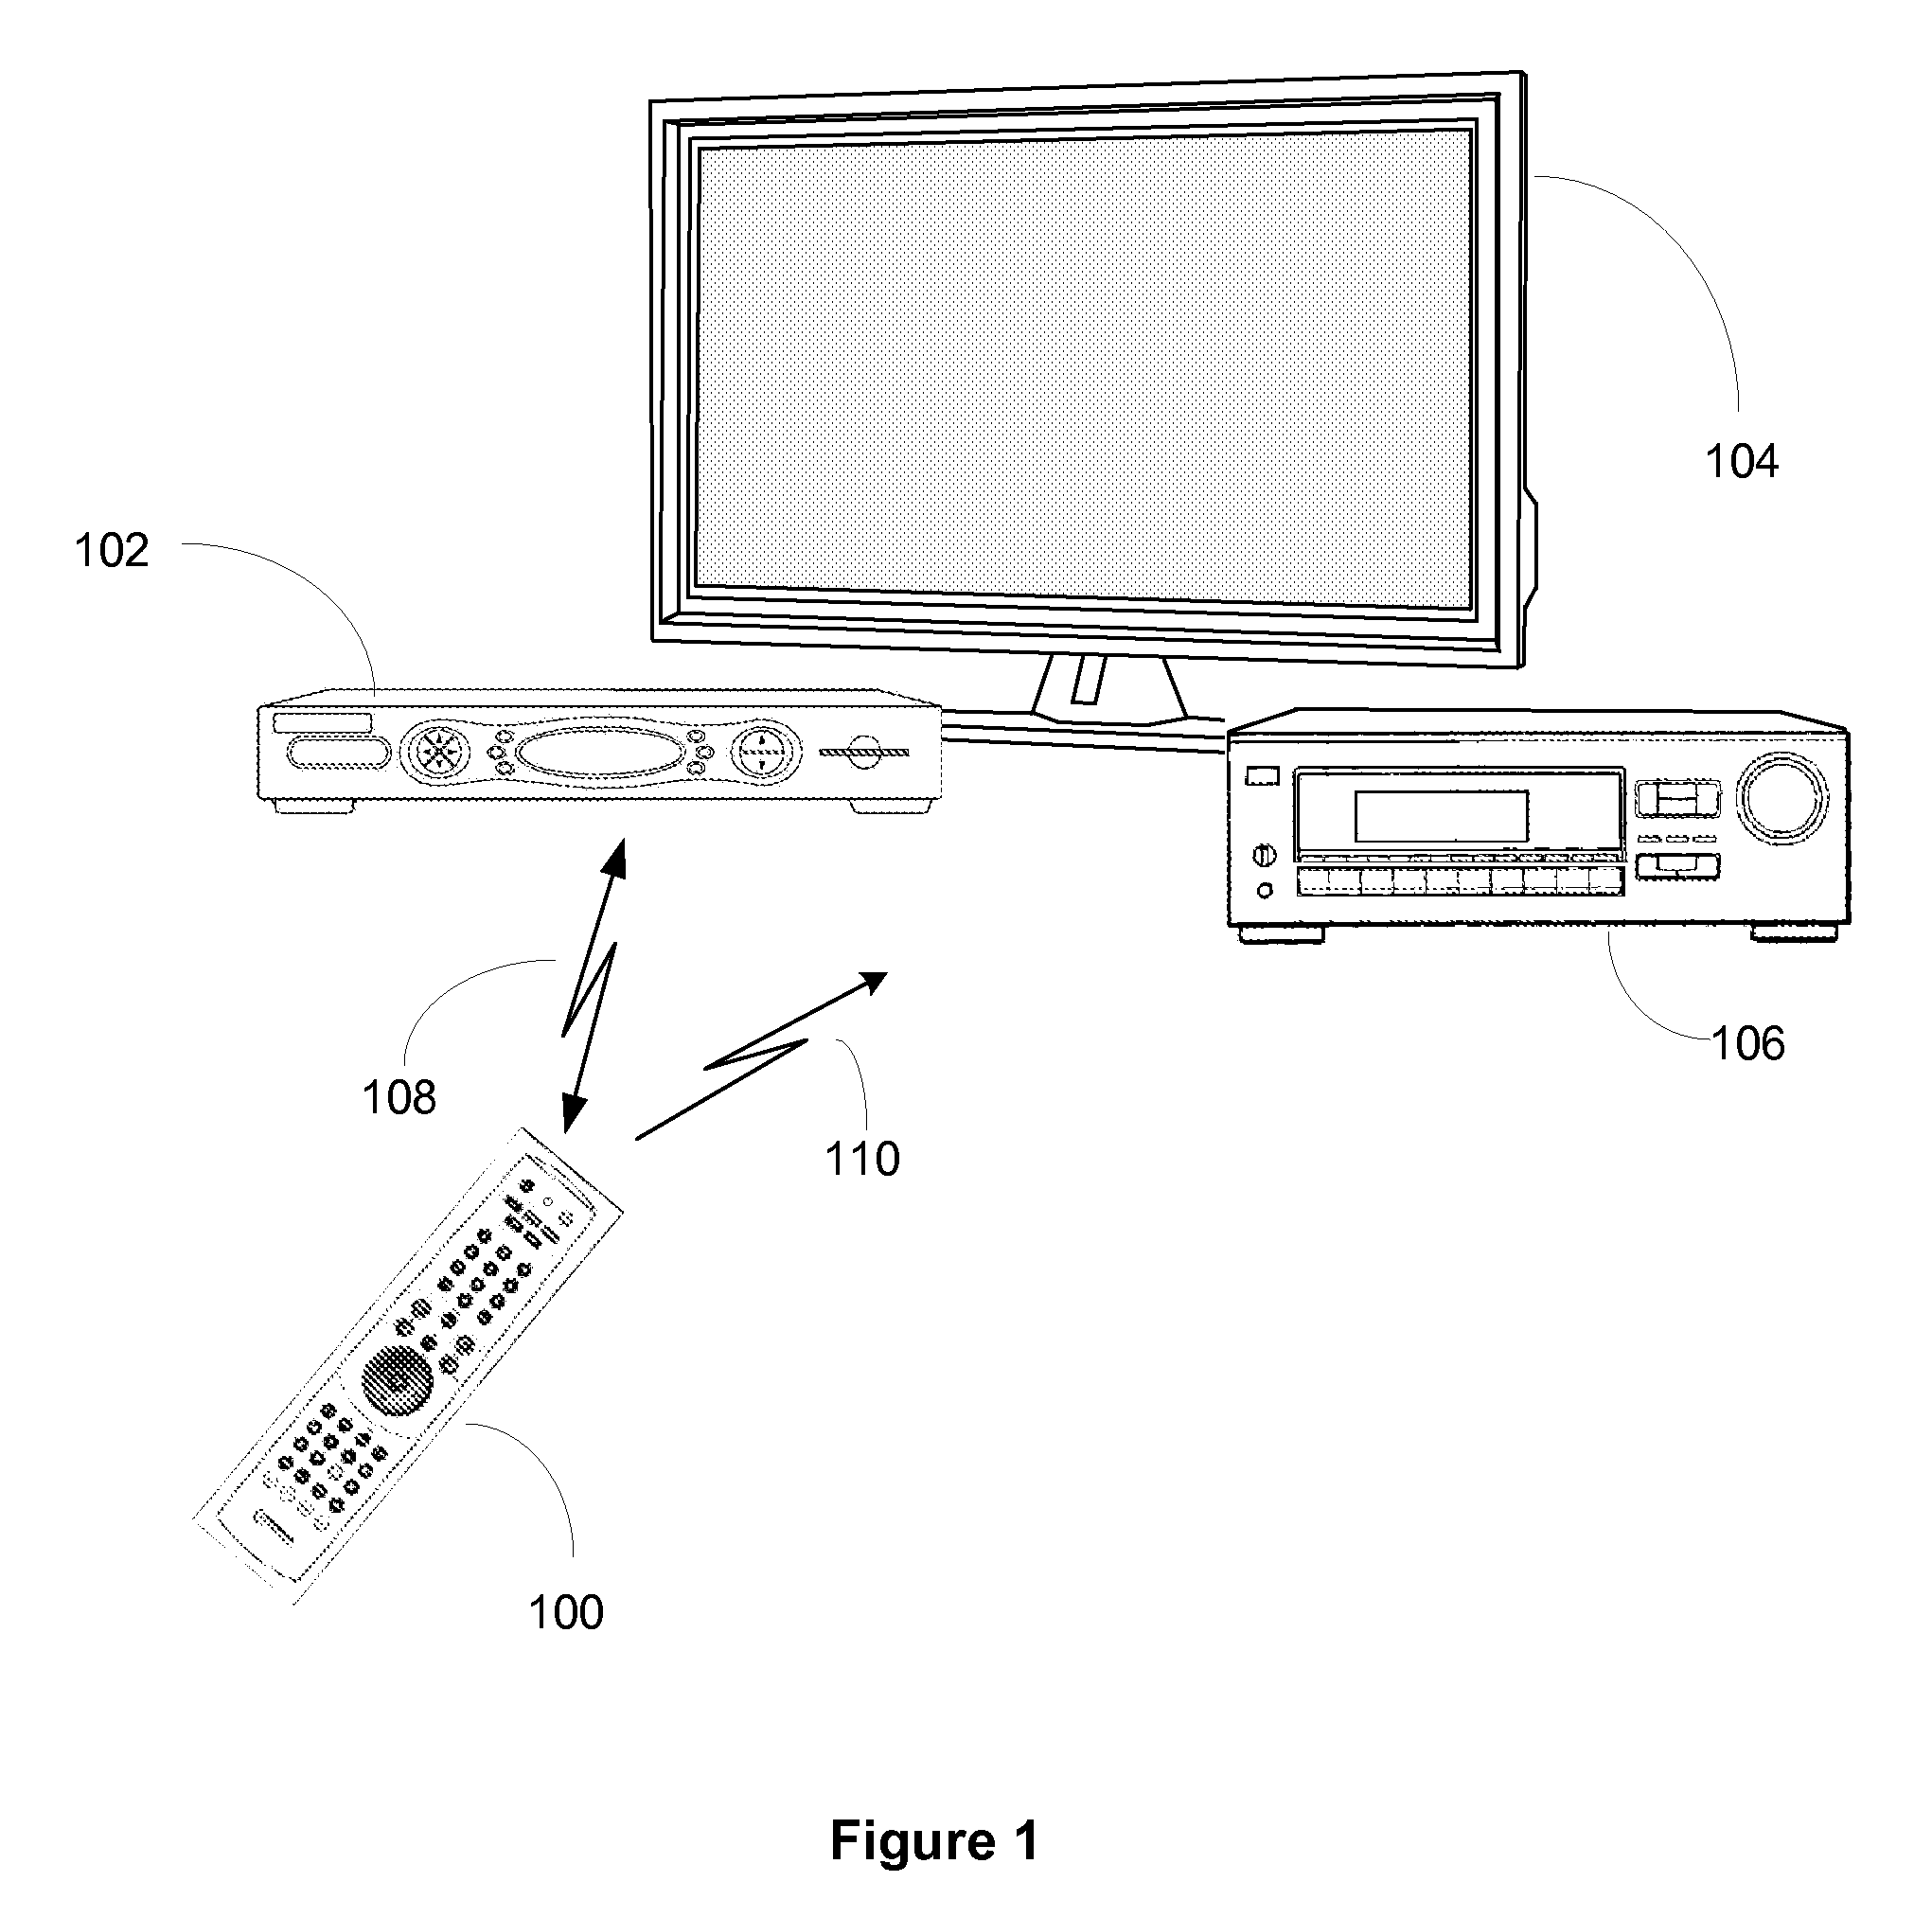 System and method for improved infrared communication between consumer appliances